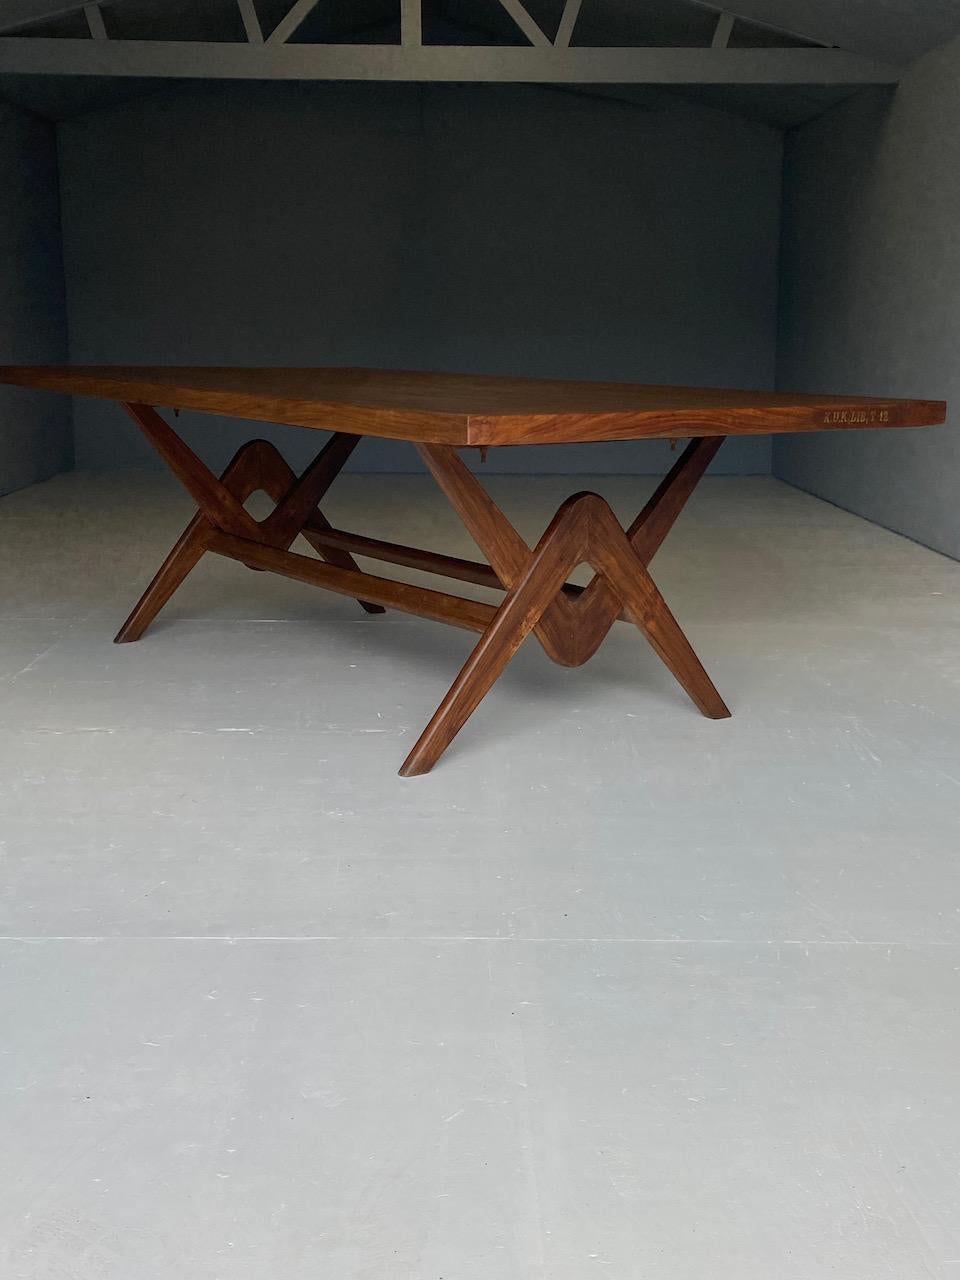 Pierre Jeanneret dining table, boardroom table or conference table & ten chairs teak Chandigarh Circa 1960s

Pierre Jeanneret Model: PJ020112 Teak Rectangular Dining Table (Table En Teck) known as 